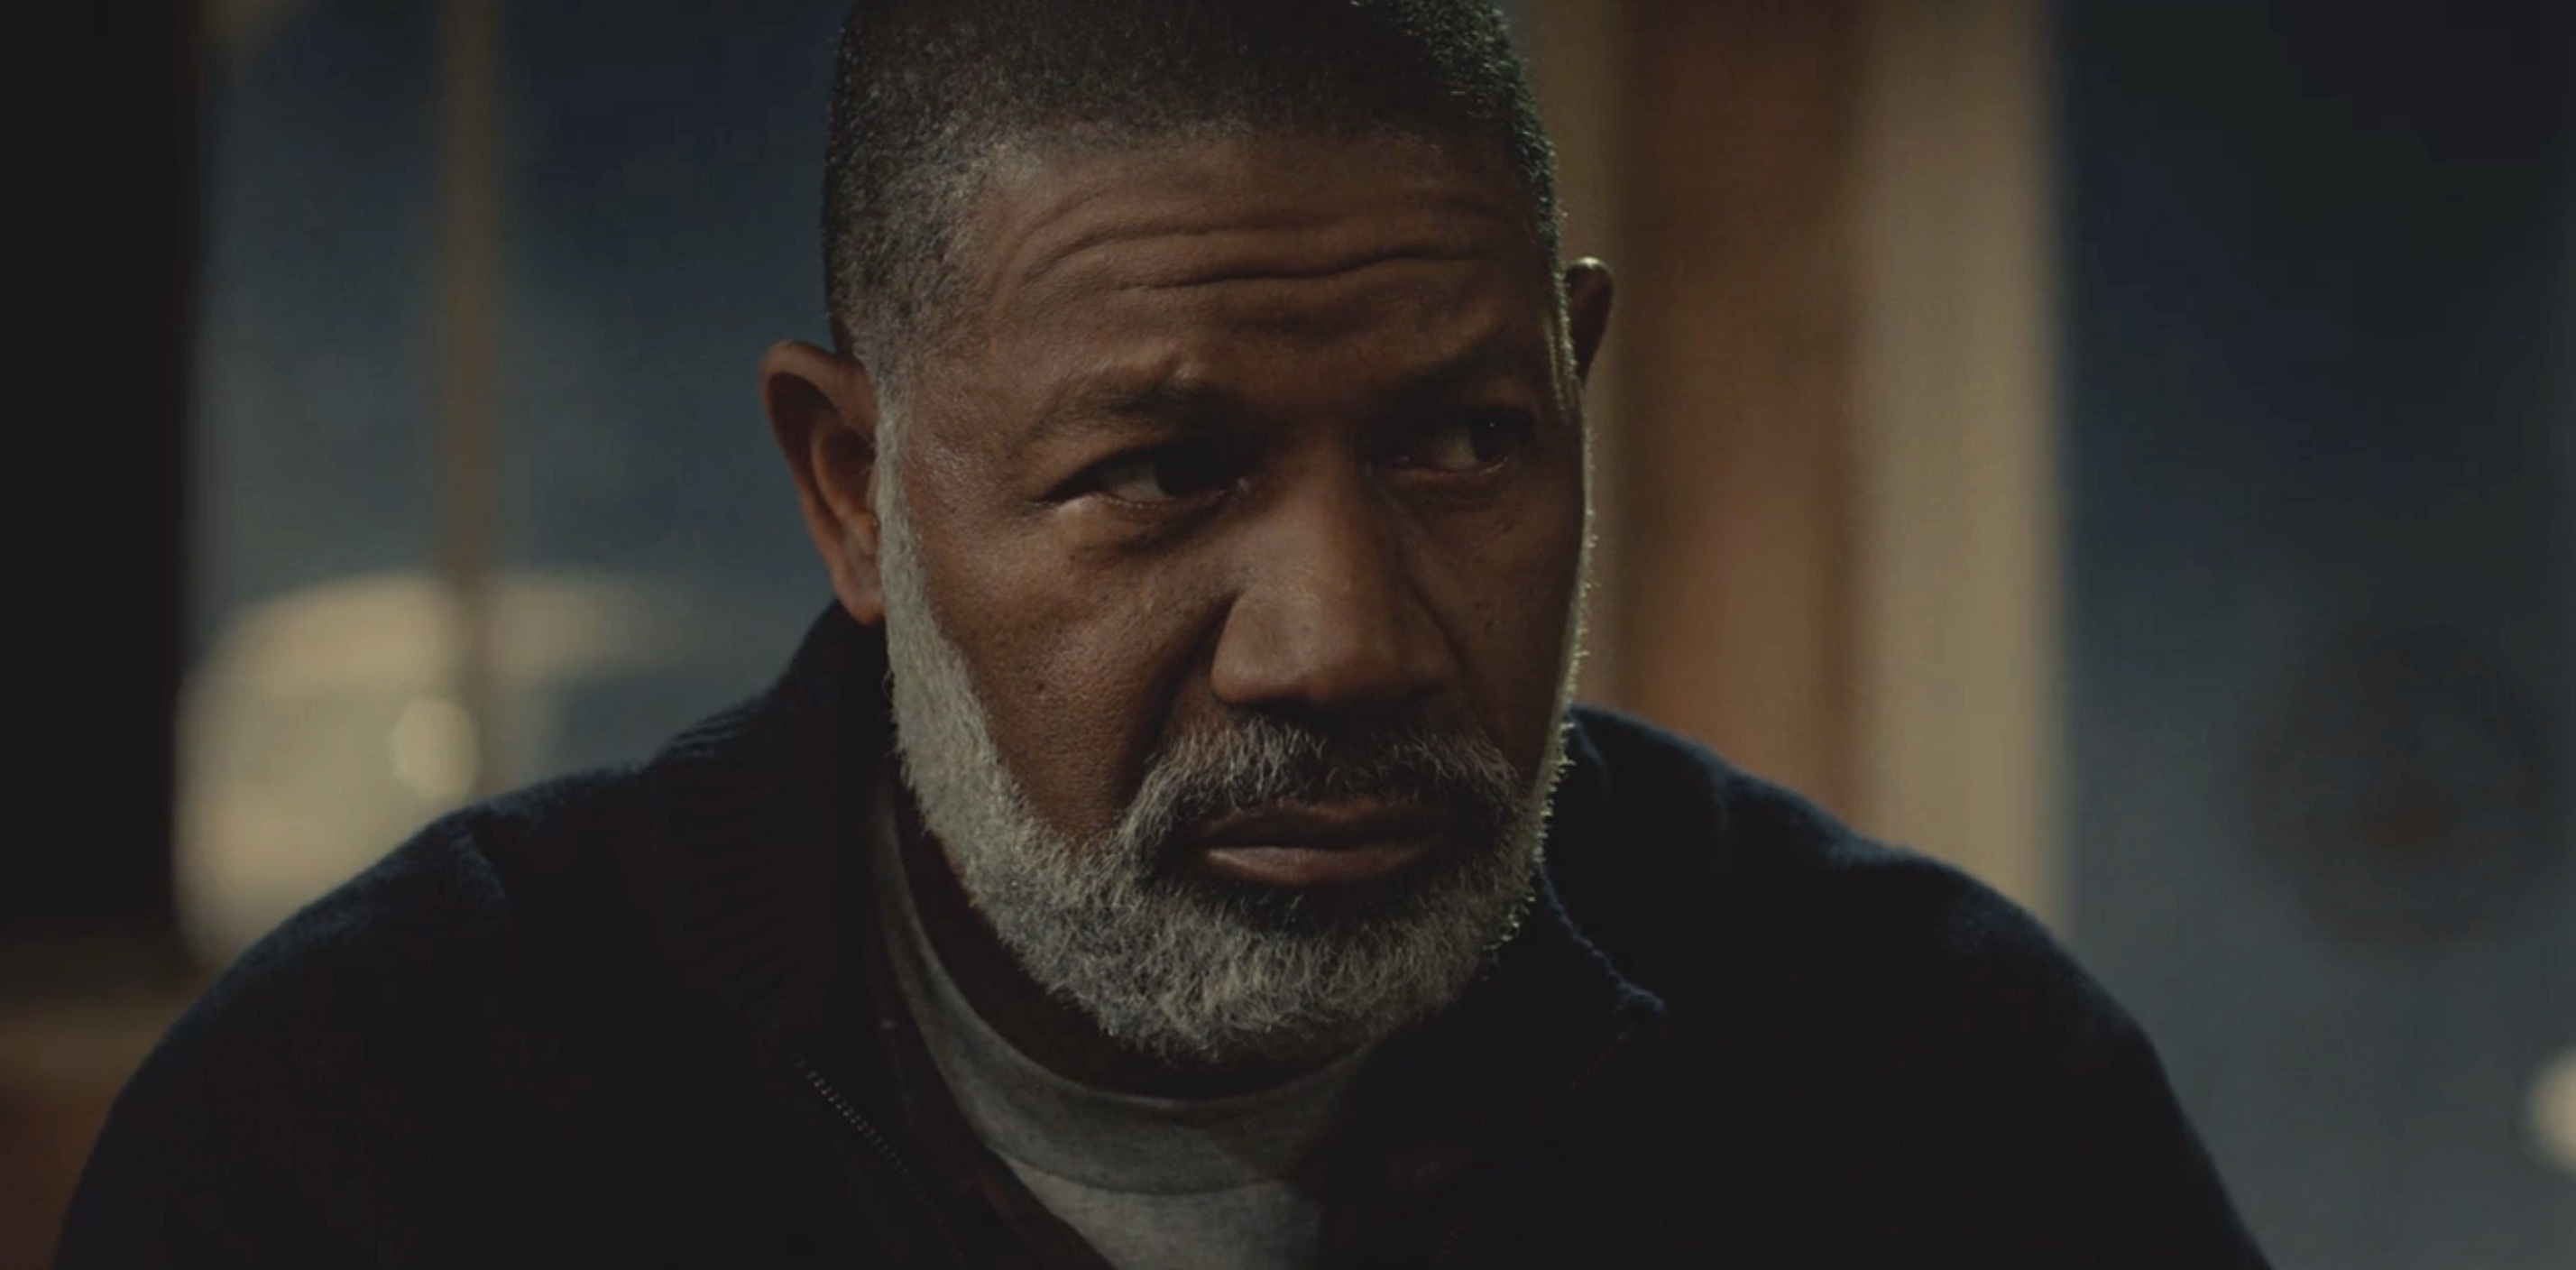 No Exit movie, Dennis Haysbert's role, Ed character, Gripping performance, 2860x1410 Dual Screen Desktop